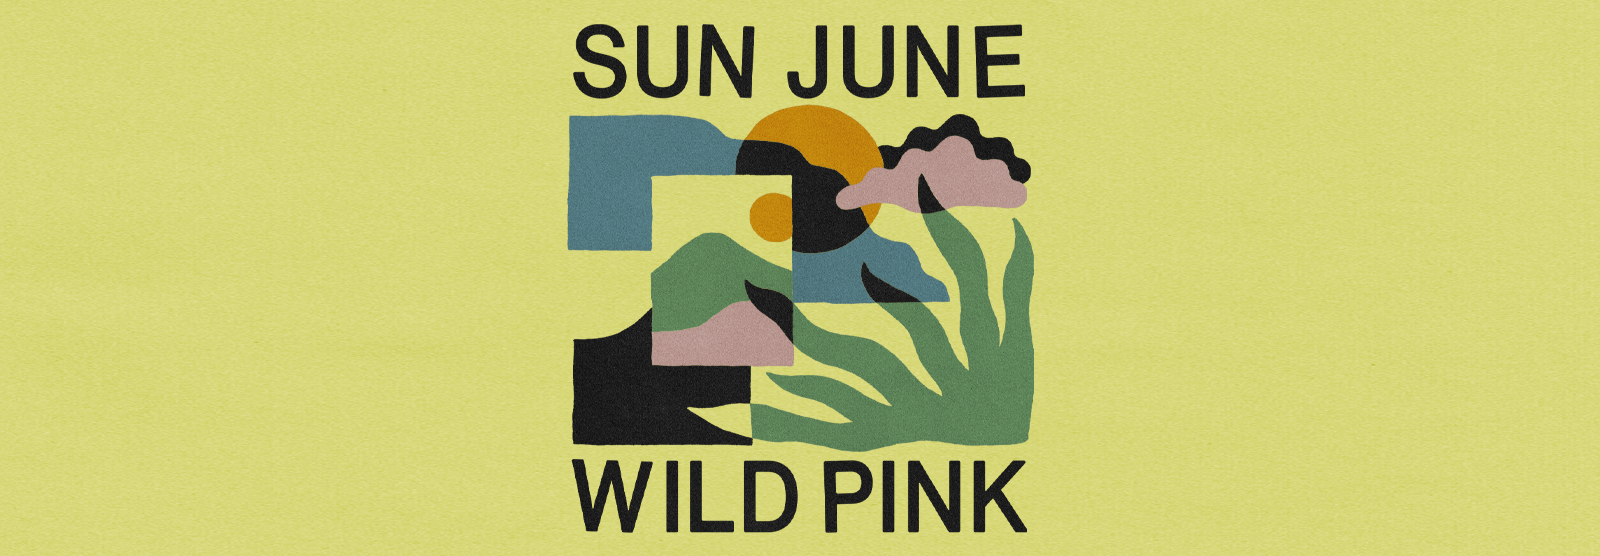 Sun June and Wild Pink